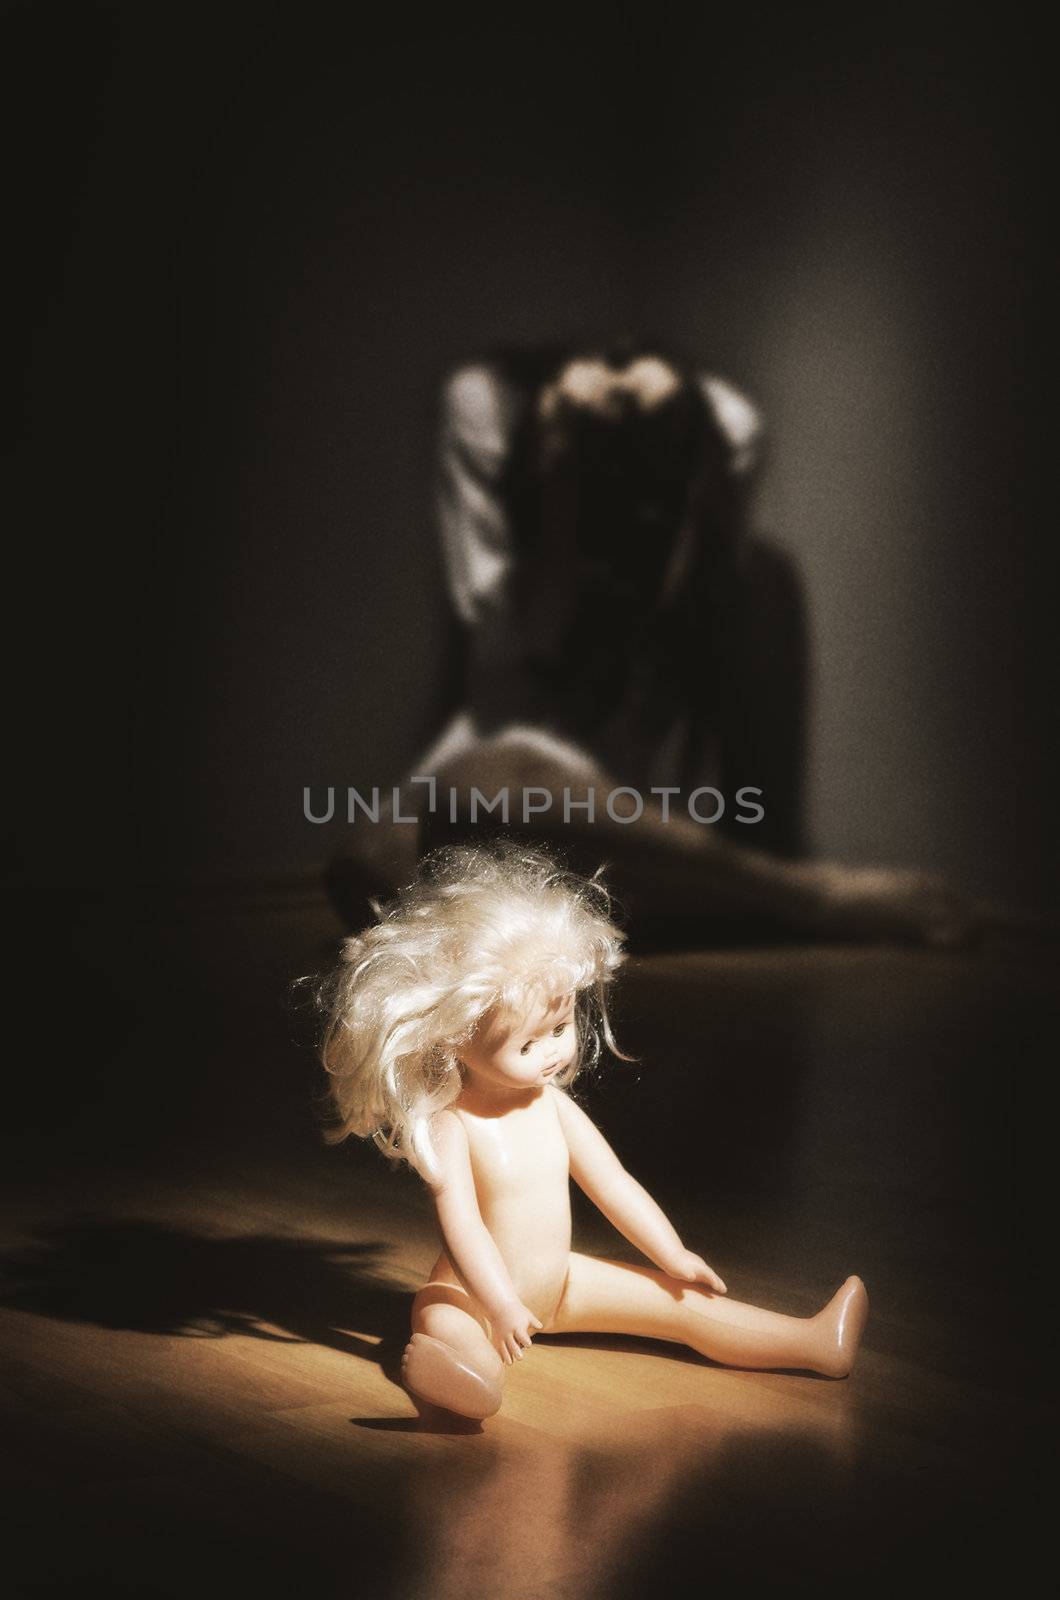 Crazy girl and plastic doll on the floor (ancient version) by rbv